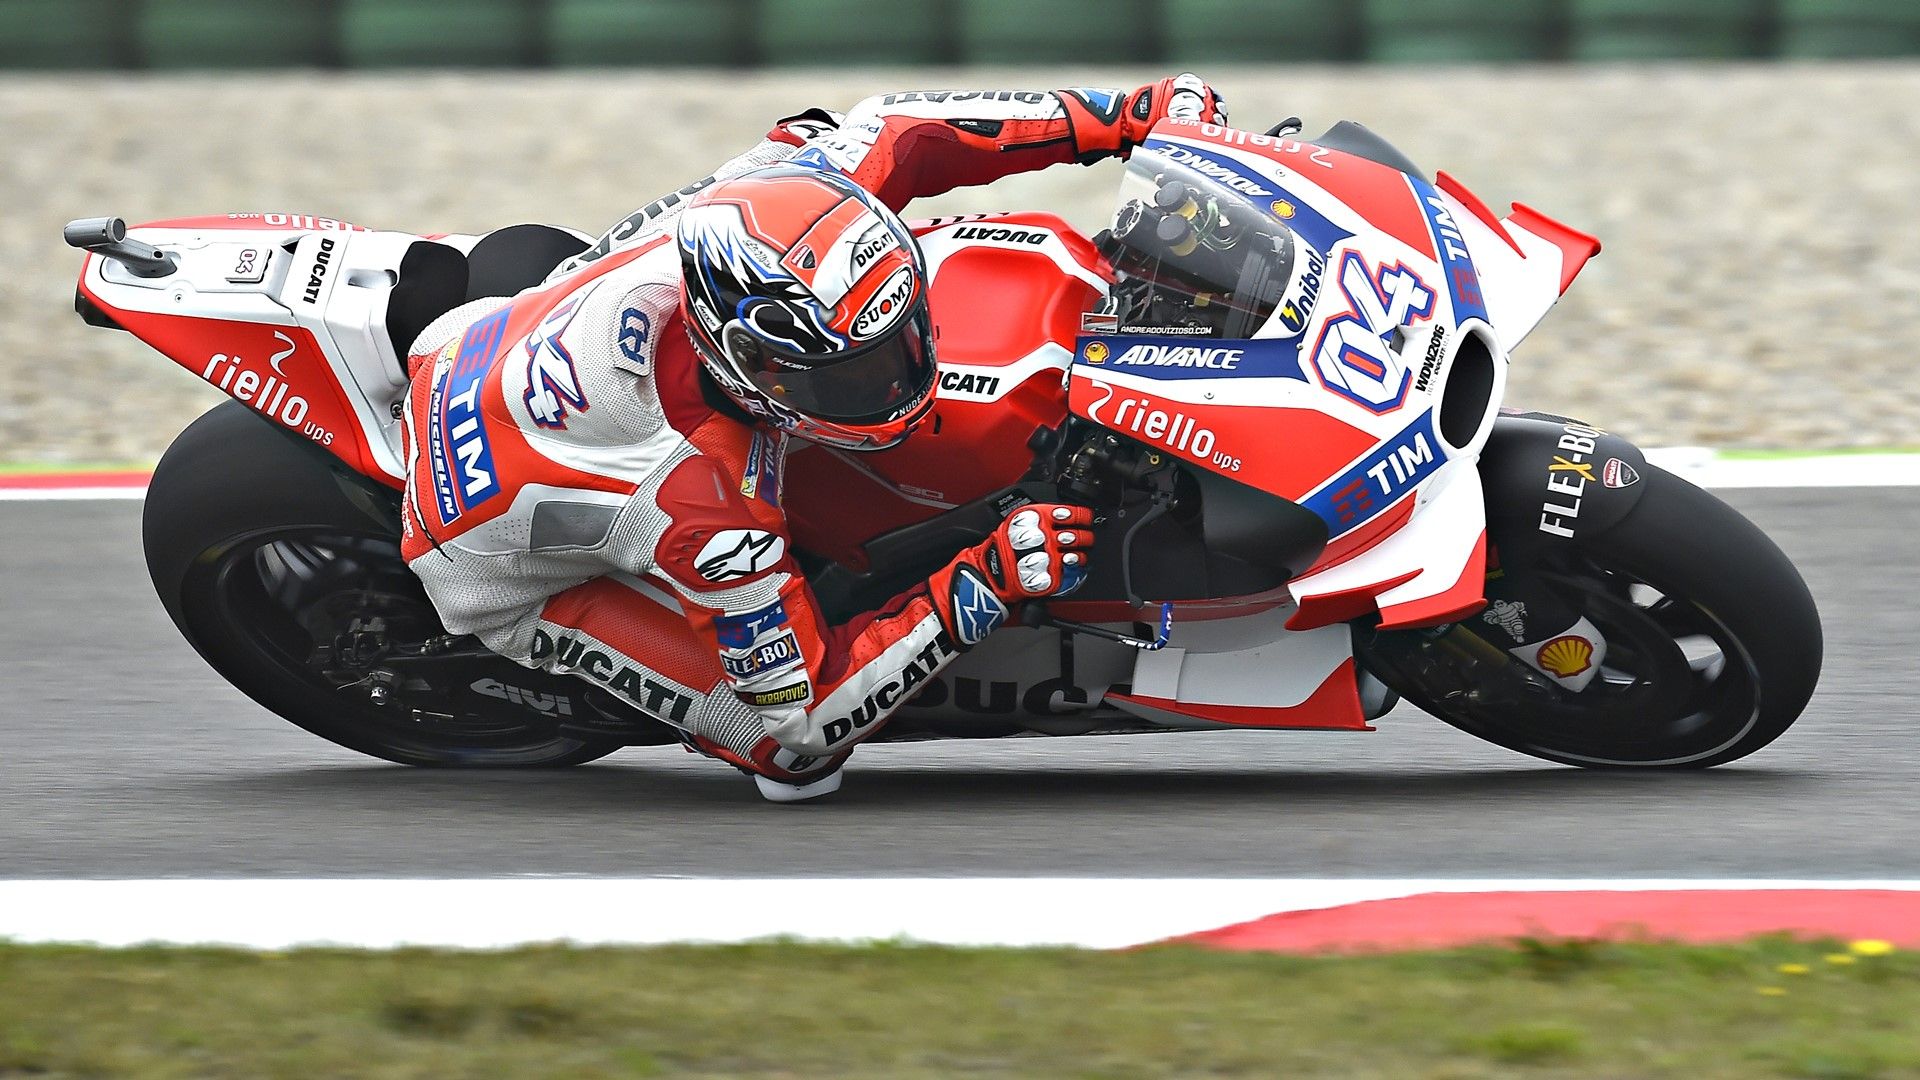 Racer entering a turn on a motorbike